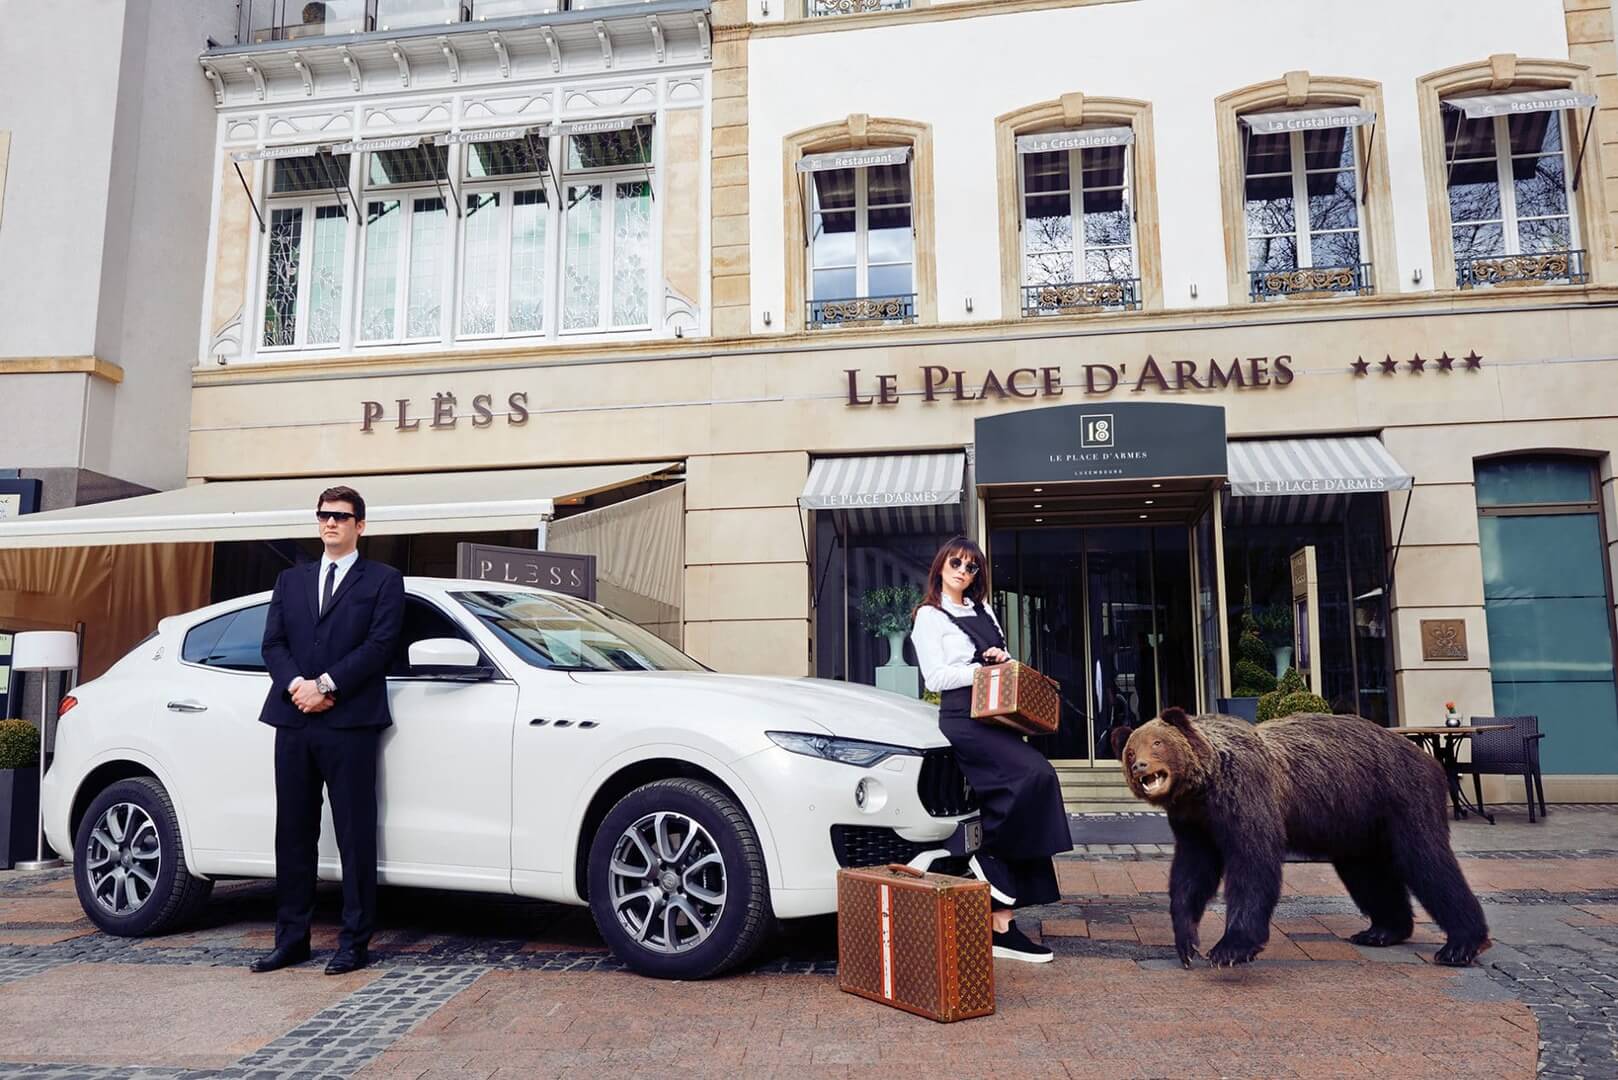 Front entrance of the "Le Palace D'Armes" hotel with a luxury car, 